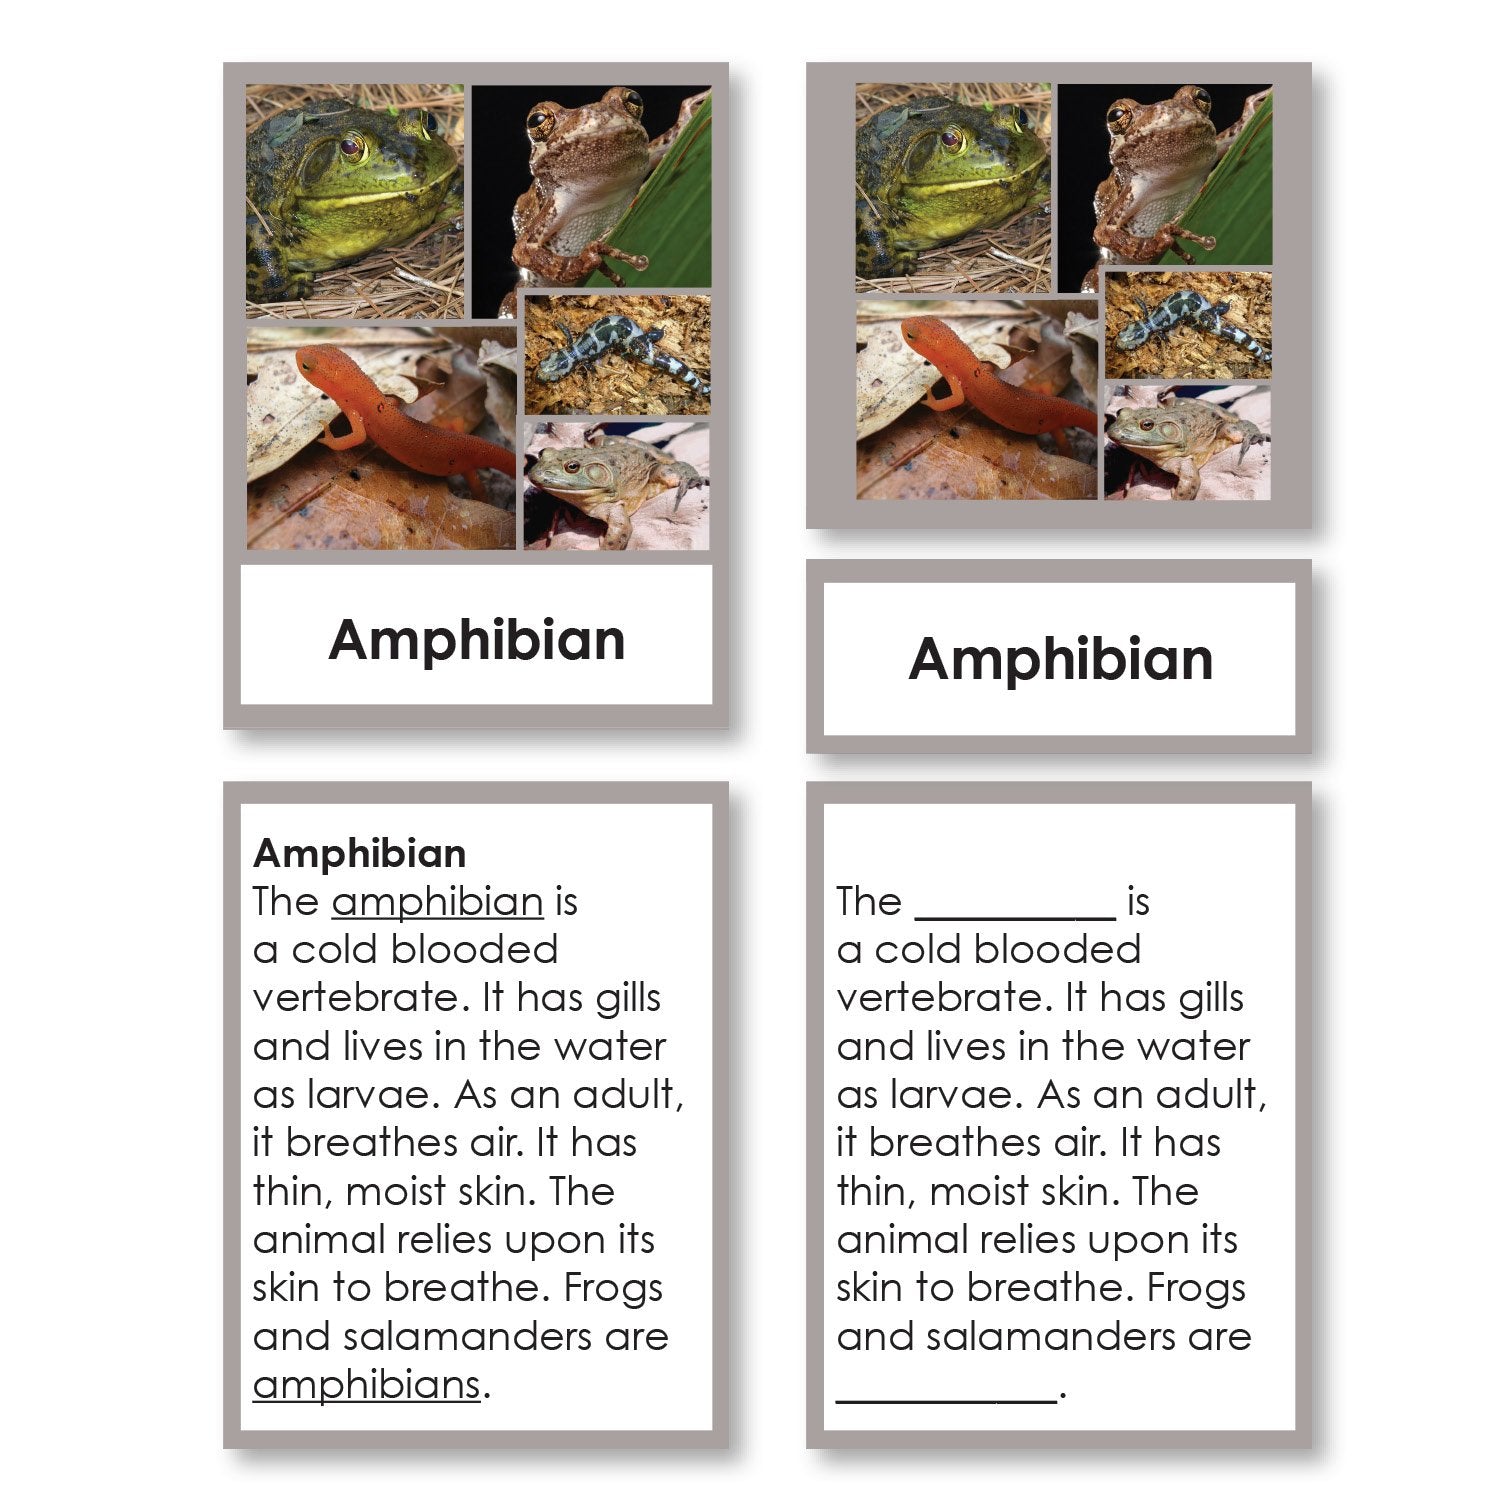 Zoology-Animal Classification/ Identification - Vertebrate Classification 3-Part Cards With Definitions